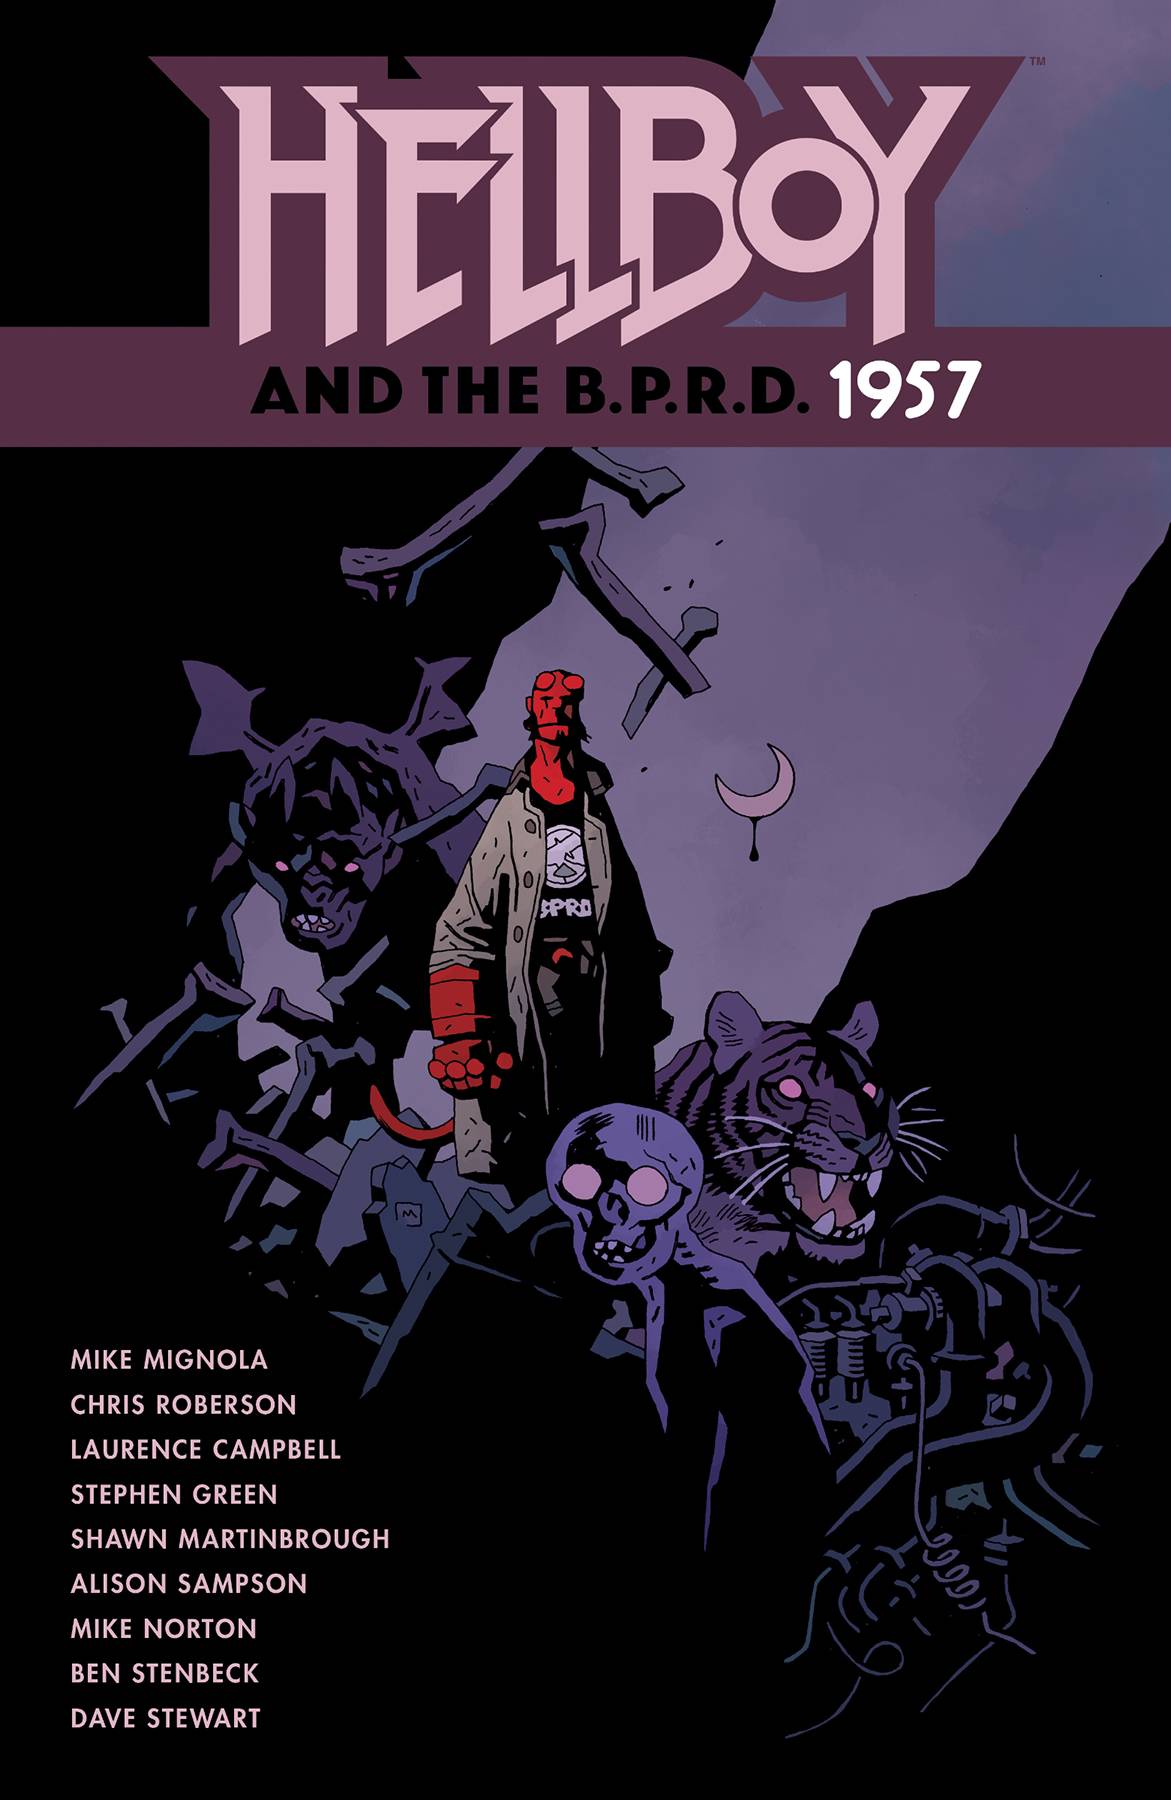 Hellboy And Bprd 1957 Tp (Res) - State of Comics